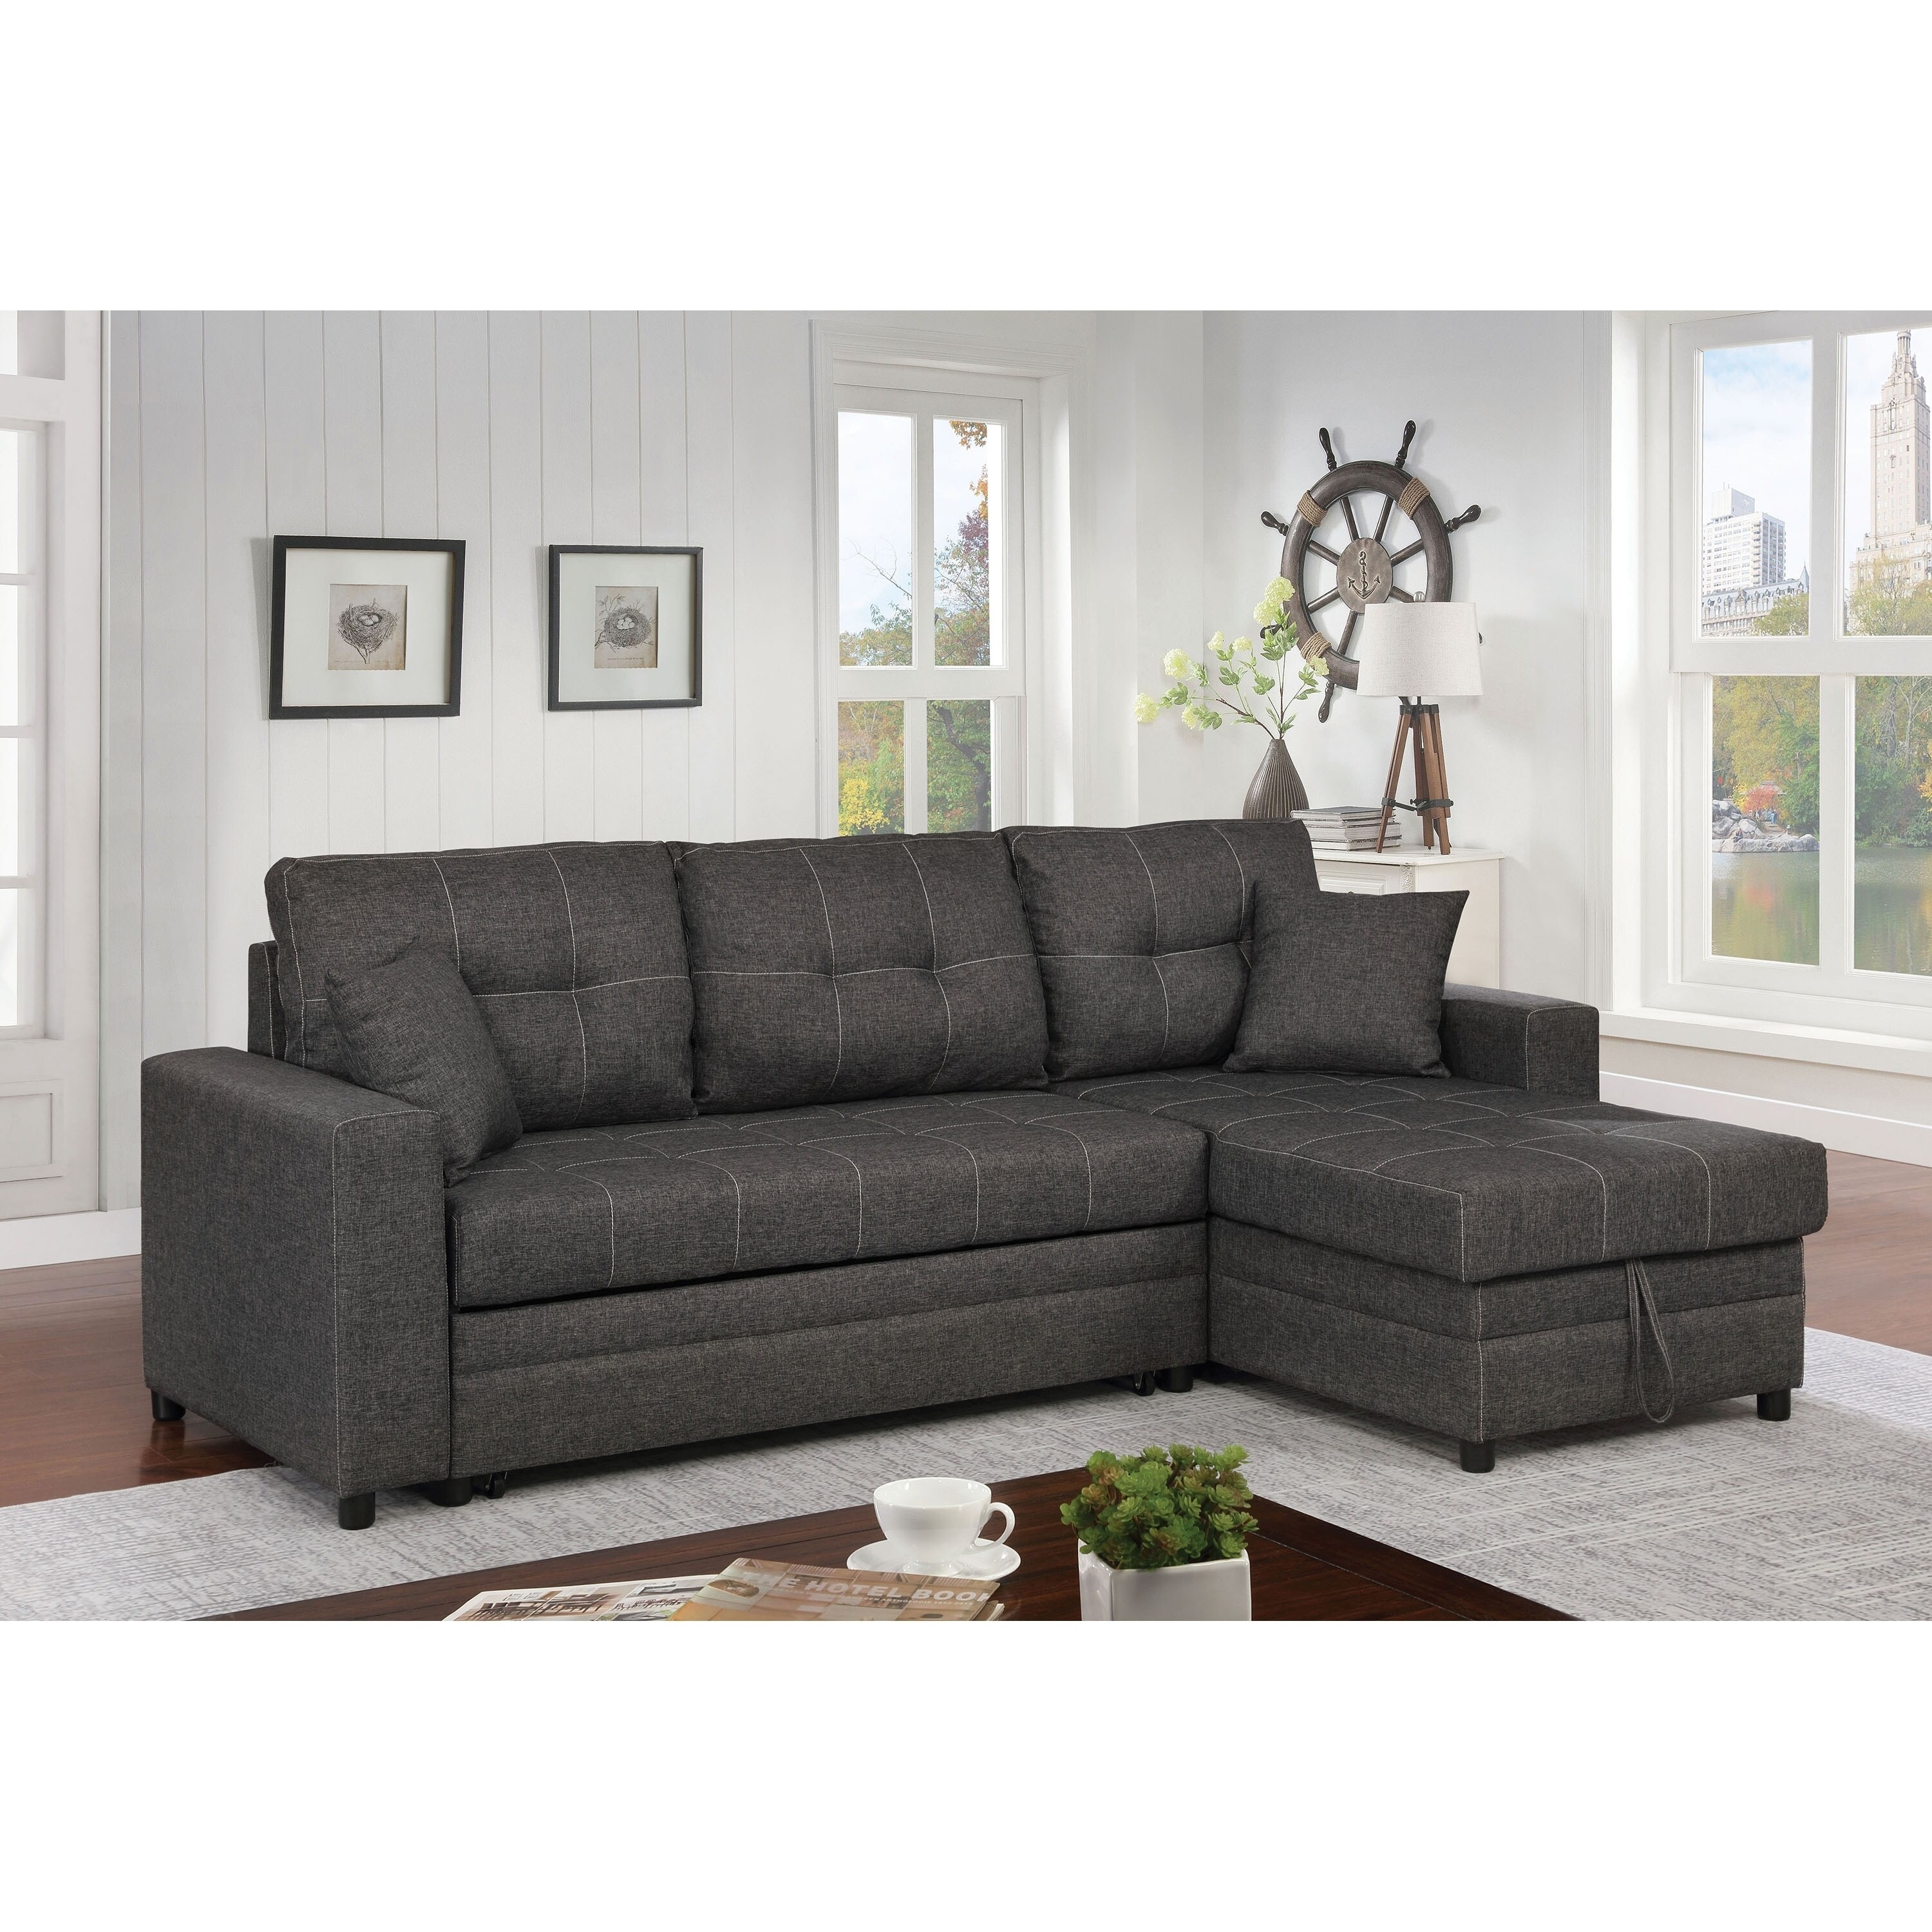 Furniture of America Pixi Contemporary Grey Fabric Sectional